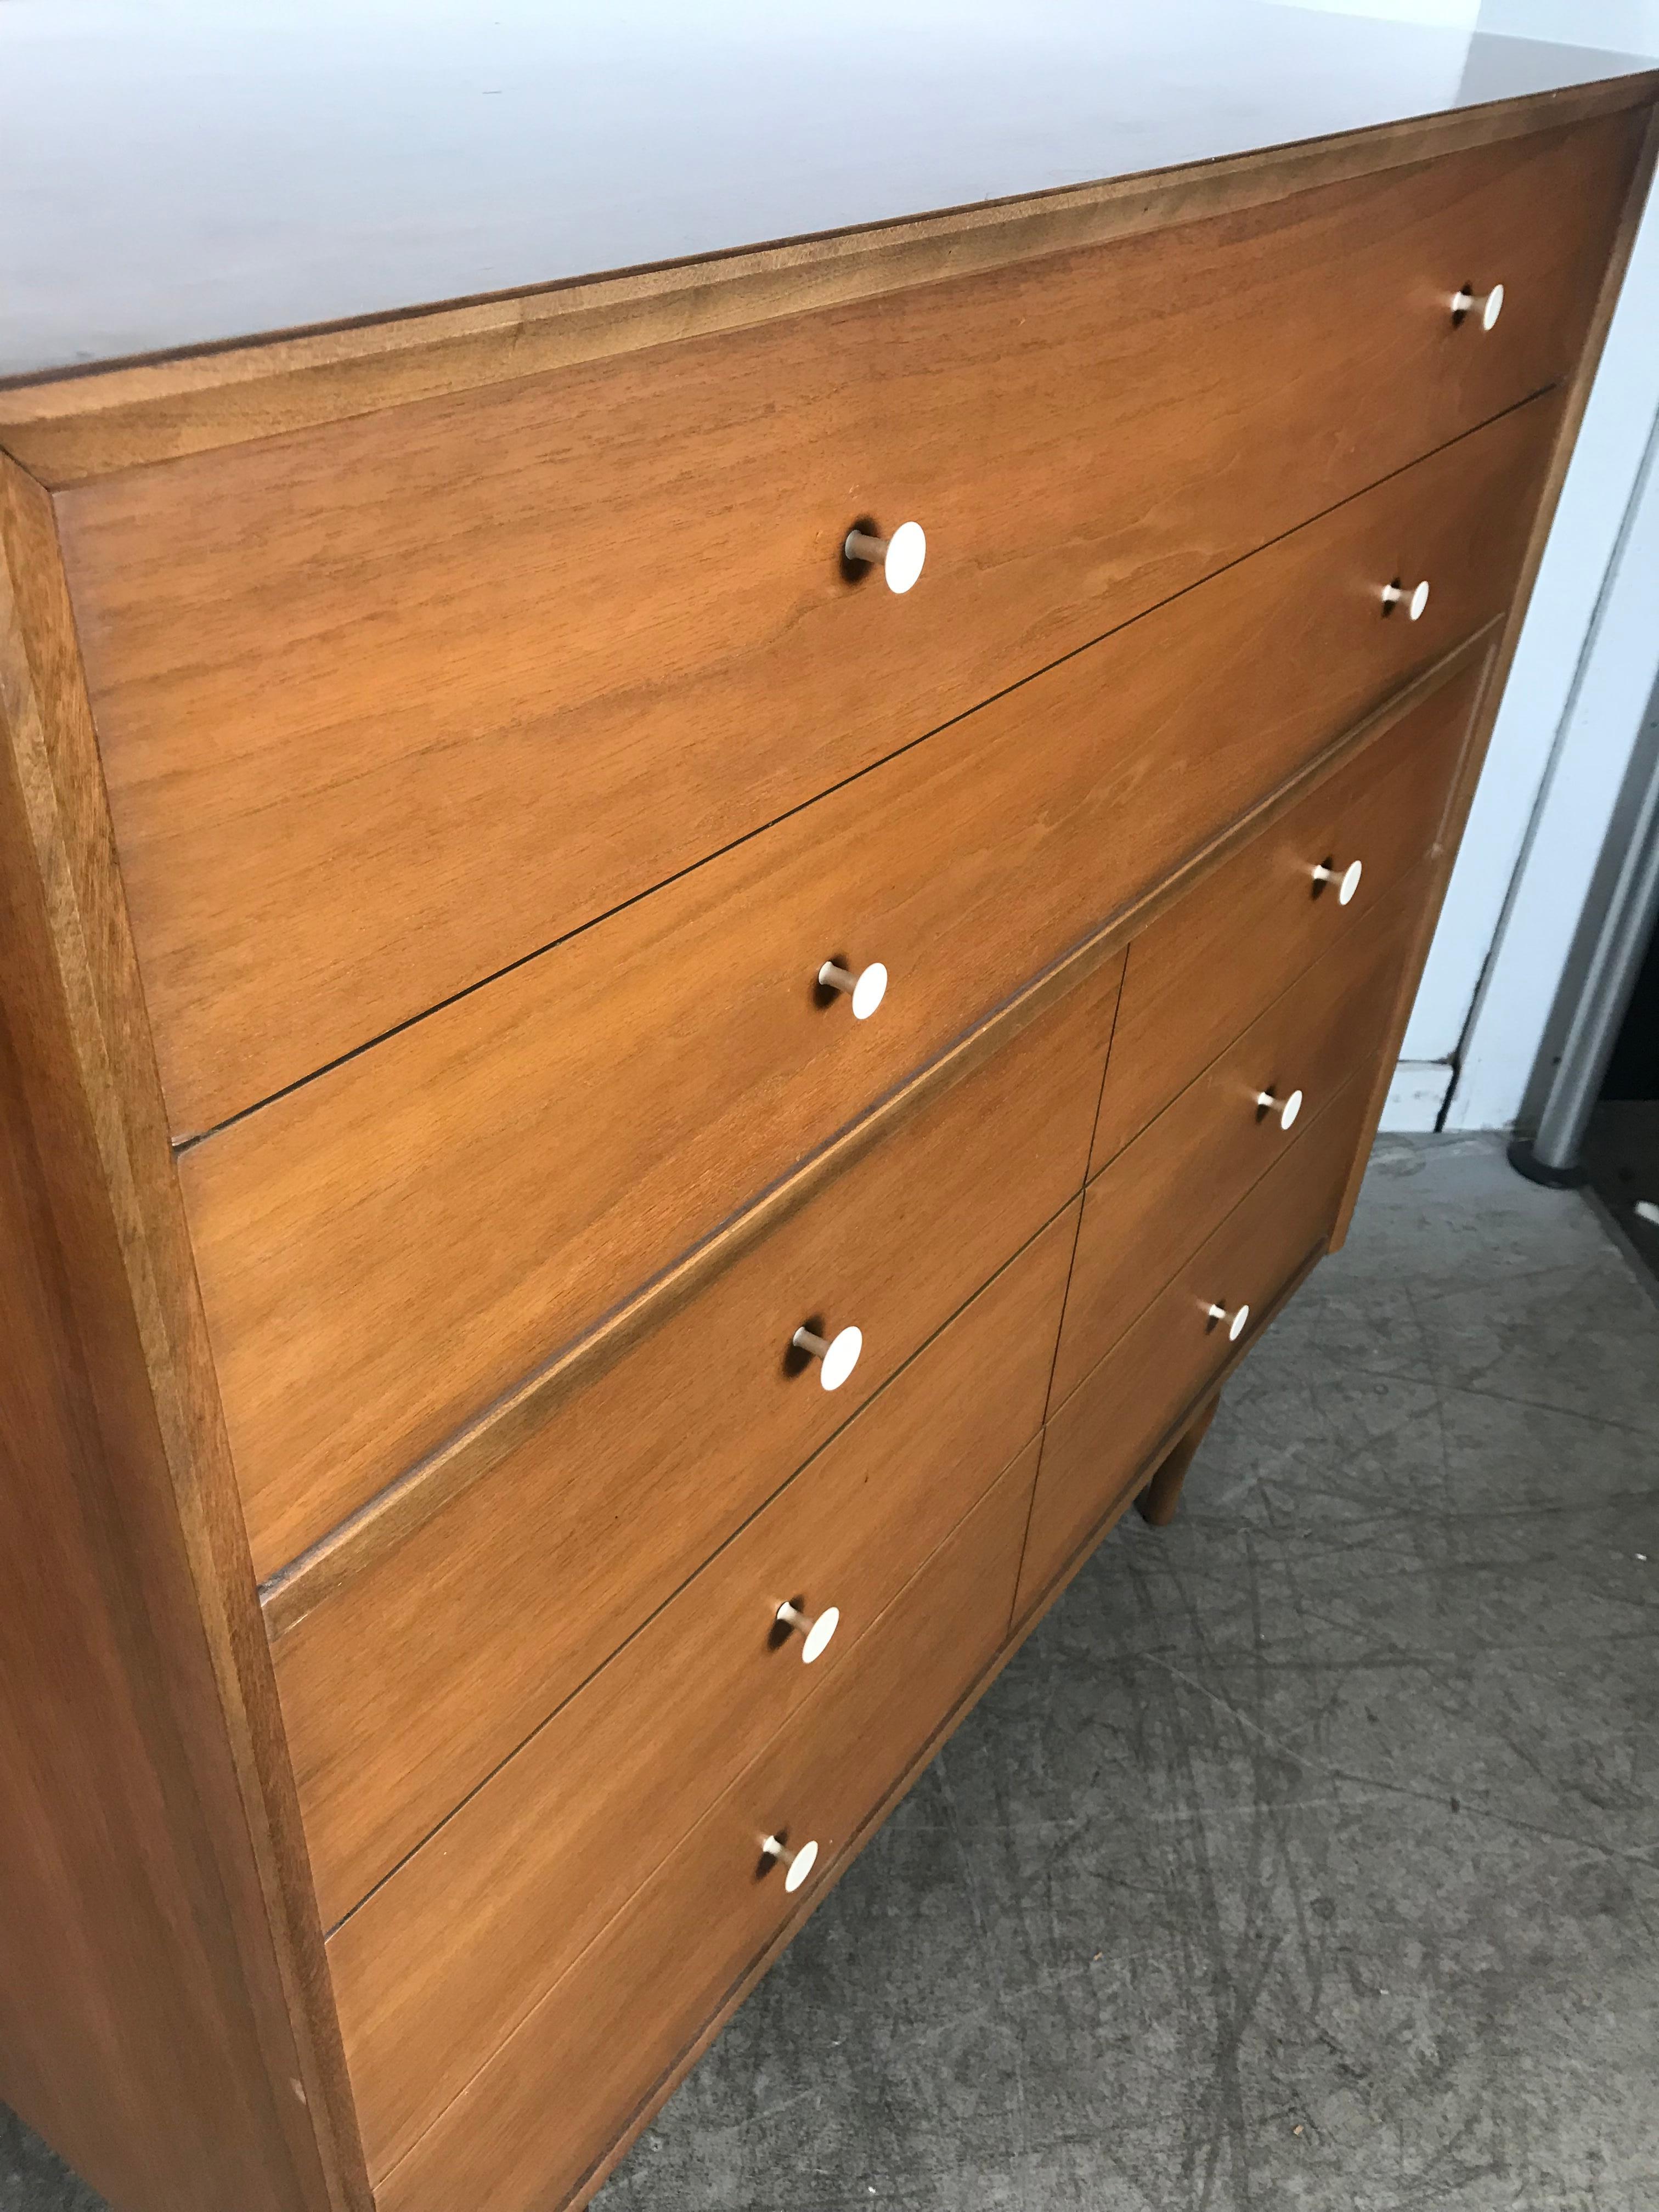 Stunning pair of American modernist 5-drawer chests. Very reminiscent of the classic designs by George Nelson, Paul McCobb etc. Handsome off white porcelain drawer pulls adorn this quality warm walnut wood, nice original finish and patina. Unusual